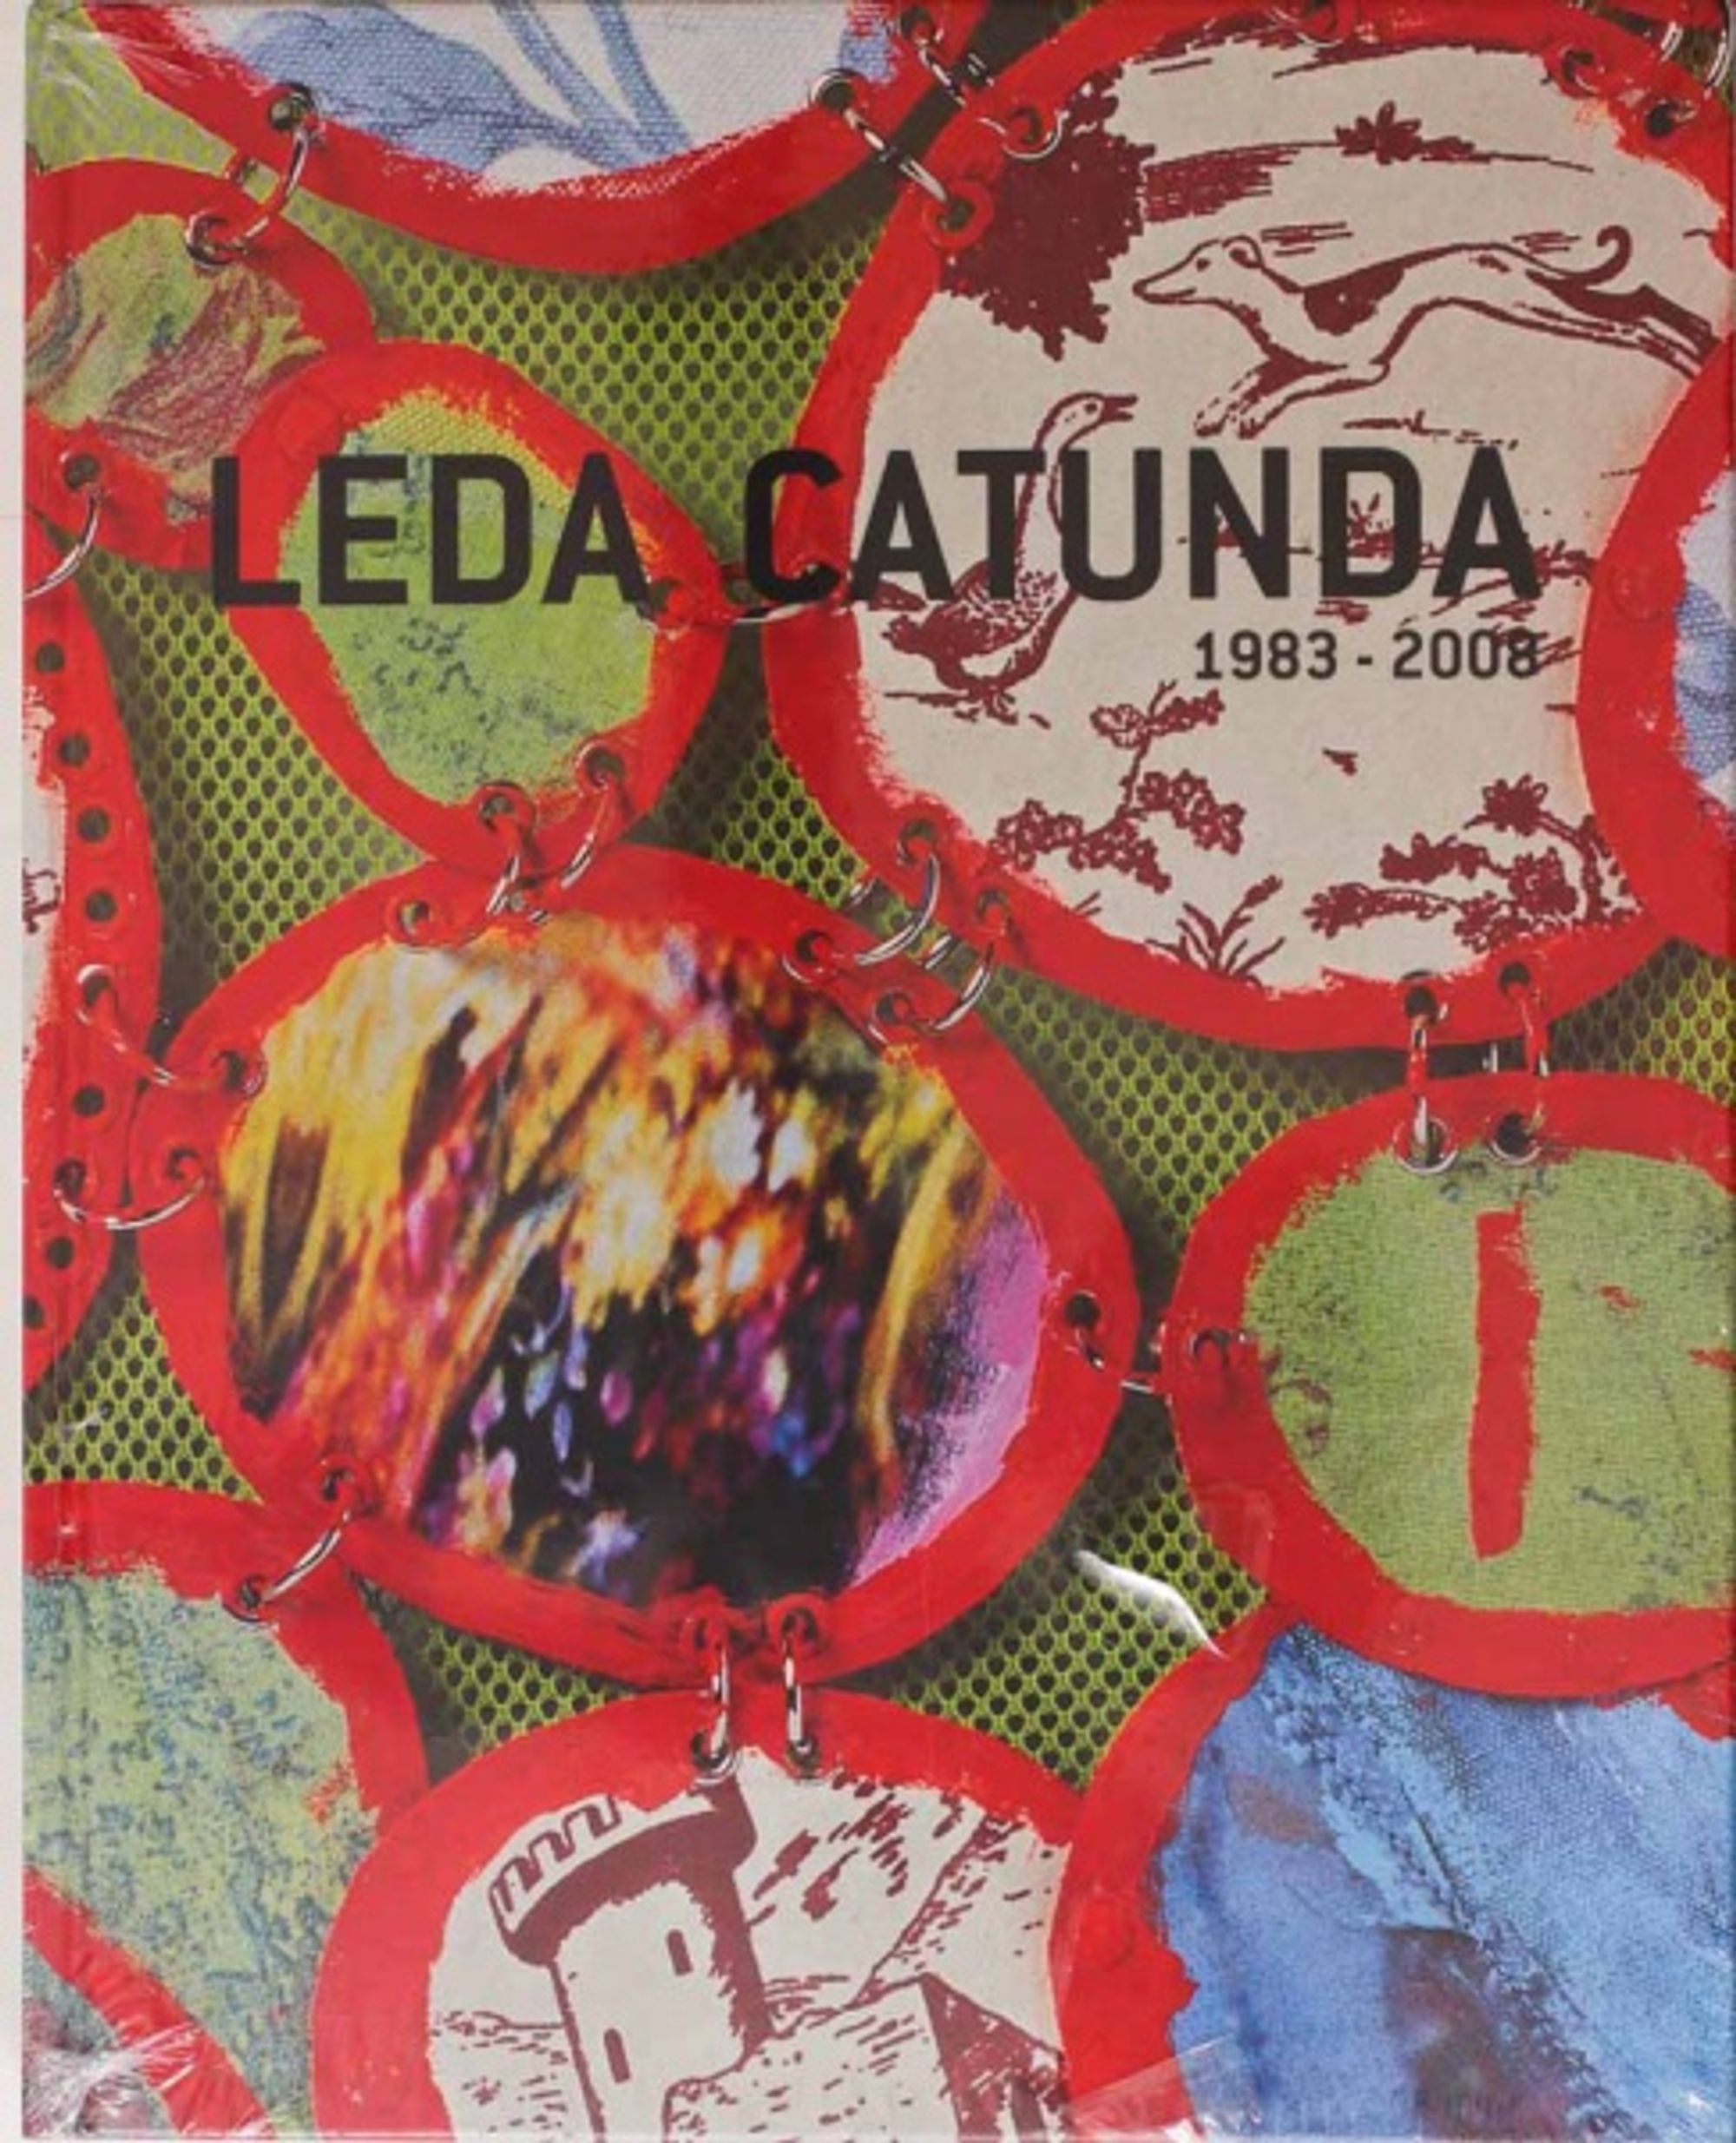 Detail view of Leda Catunda: 1983-2008 against a plain gray background